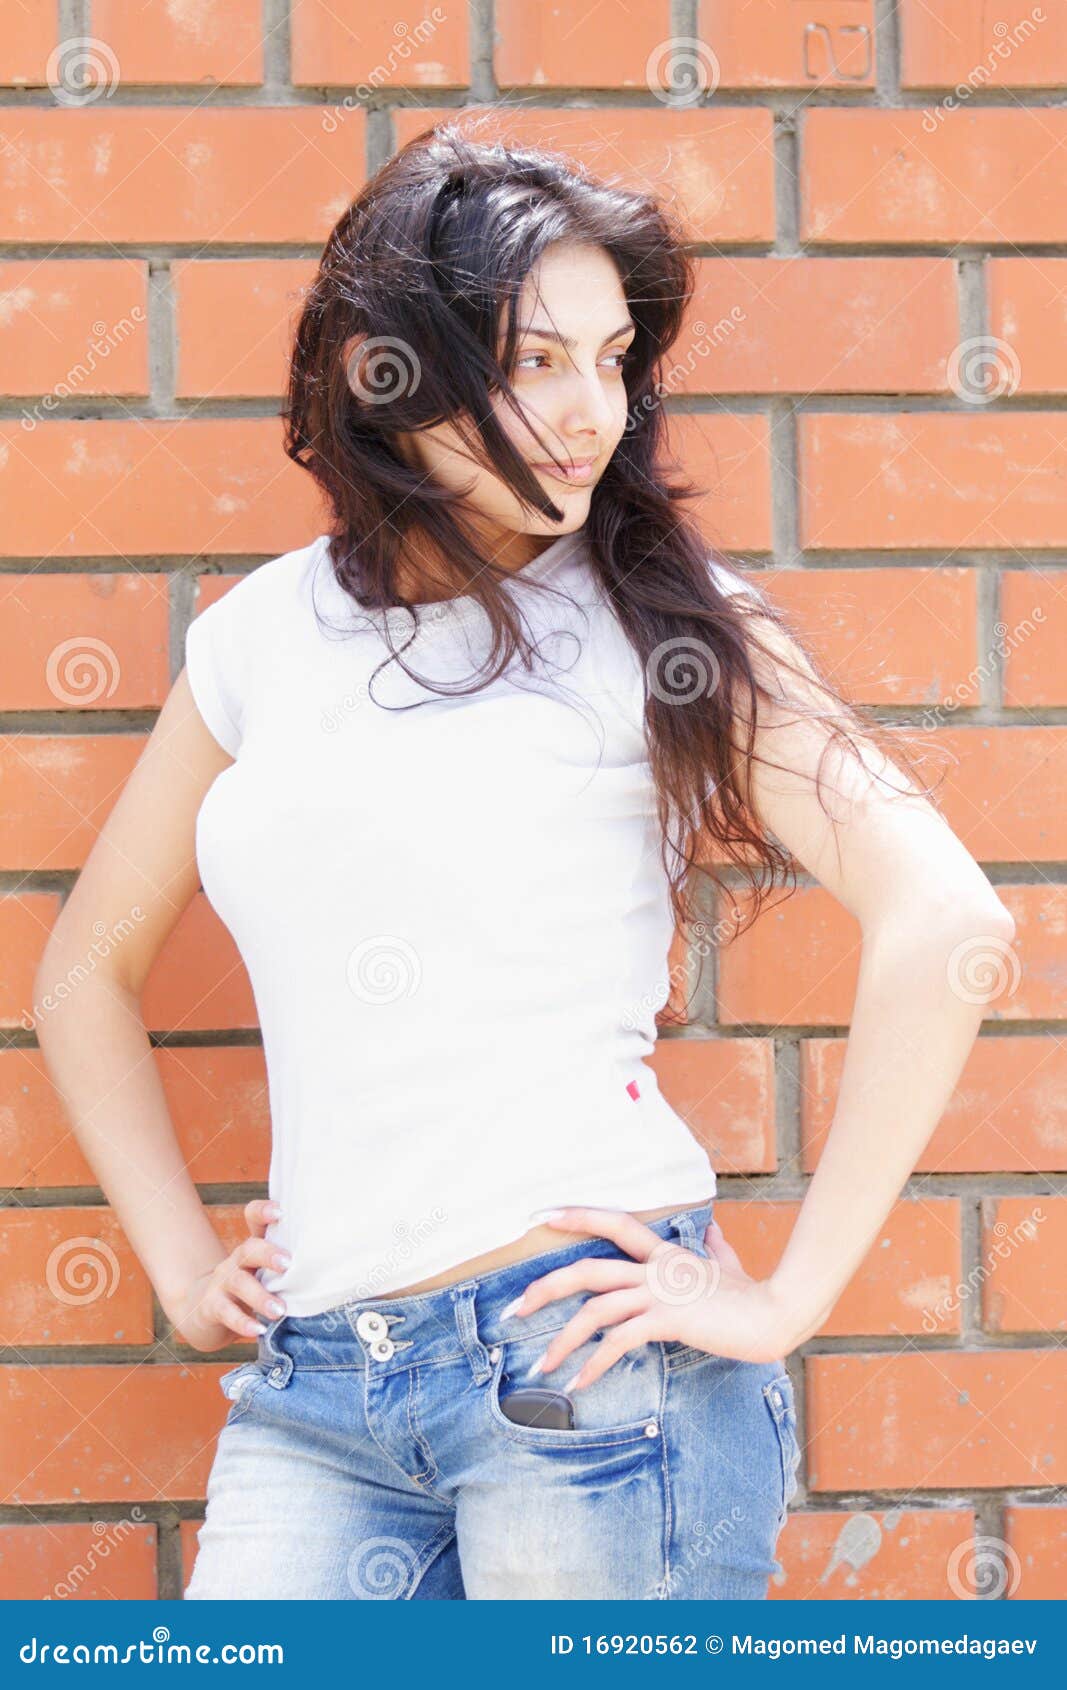 Hands on hips stock photo. Image of looking, vertical - 16920562